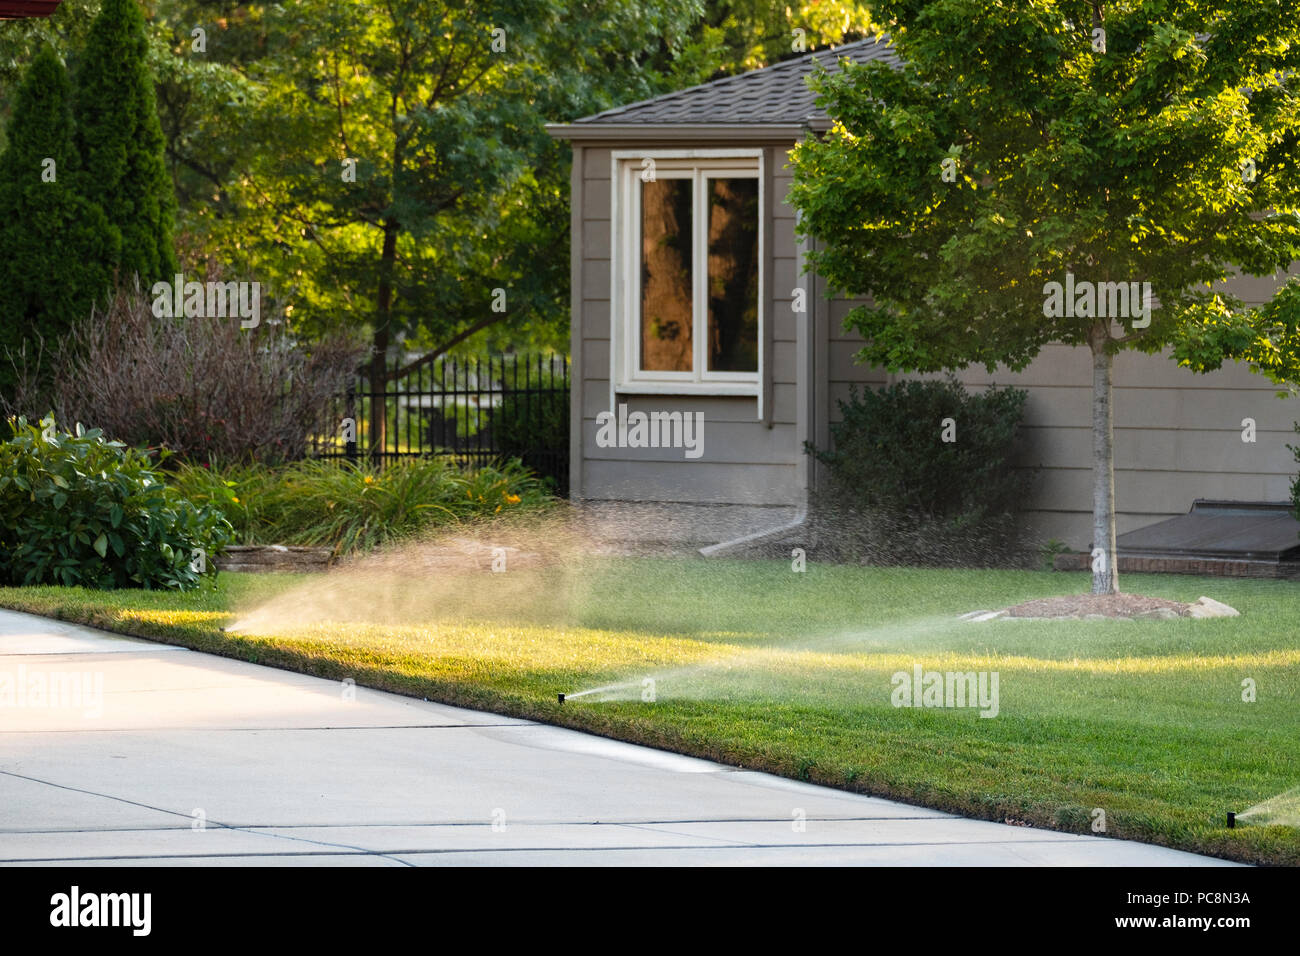 An in-ground sprinkler system watering a lawn. USA. Stock Photo